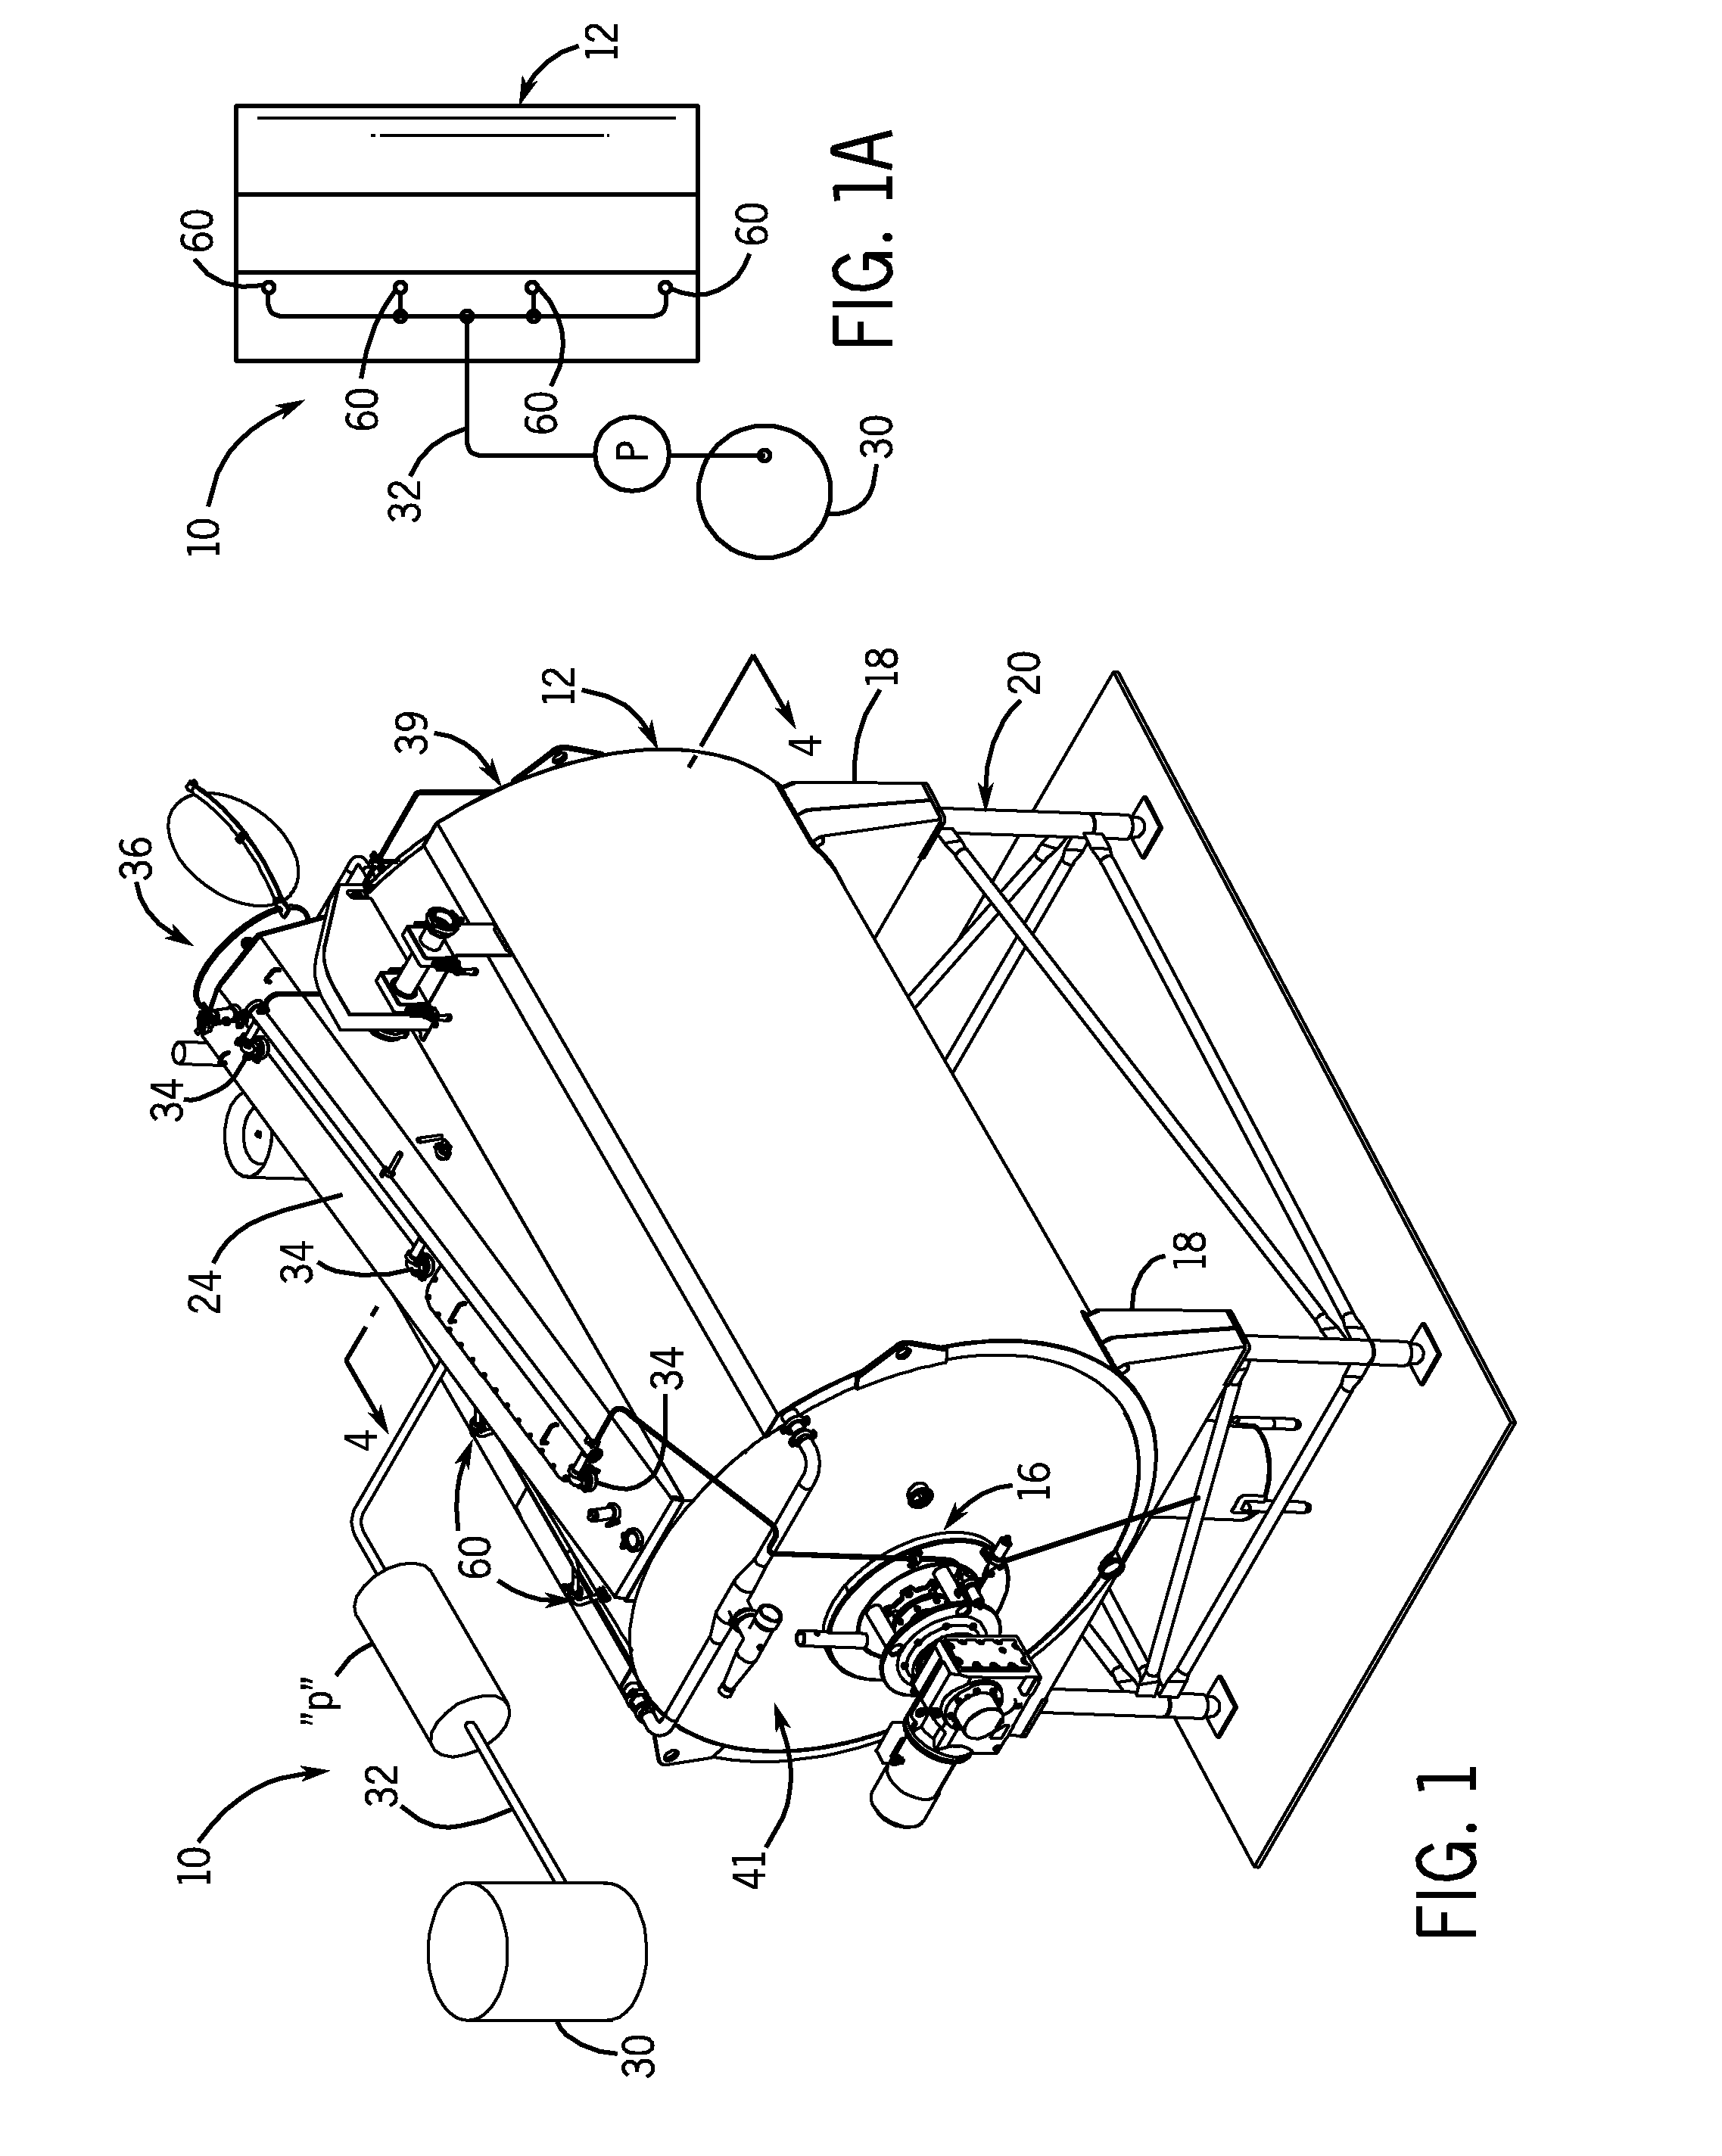 Rennet injection apparatus and method